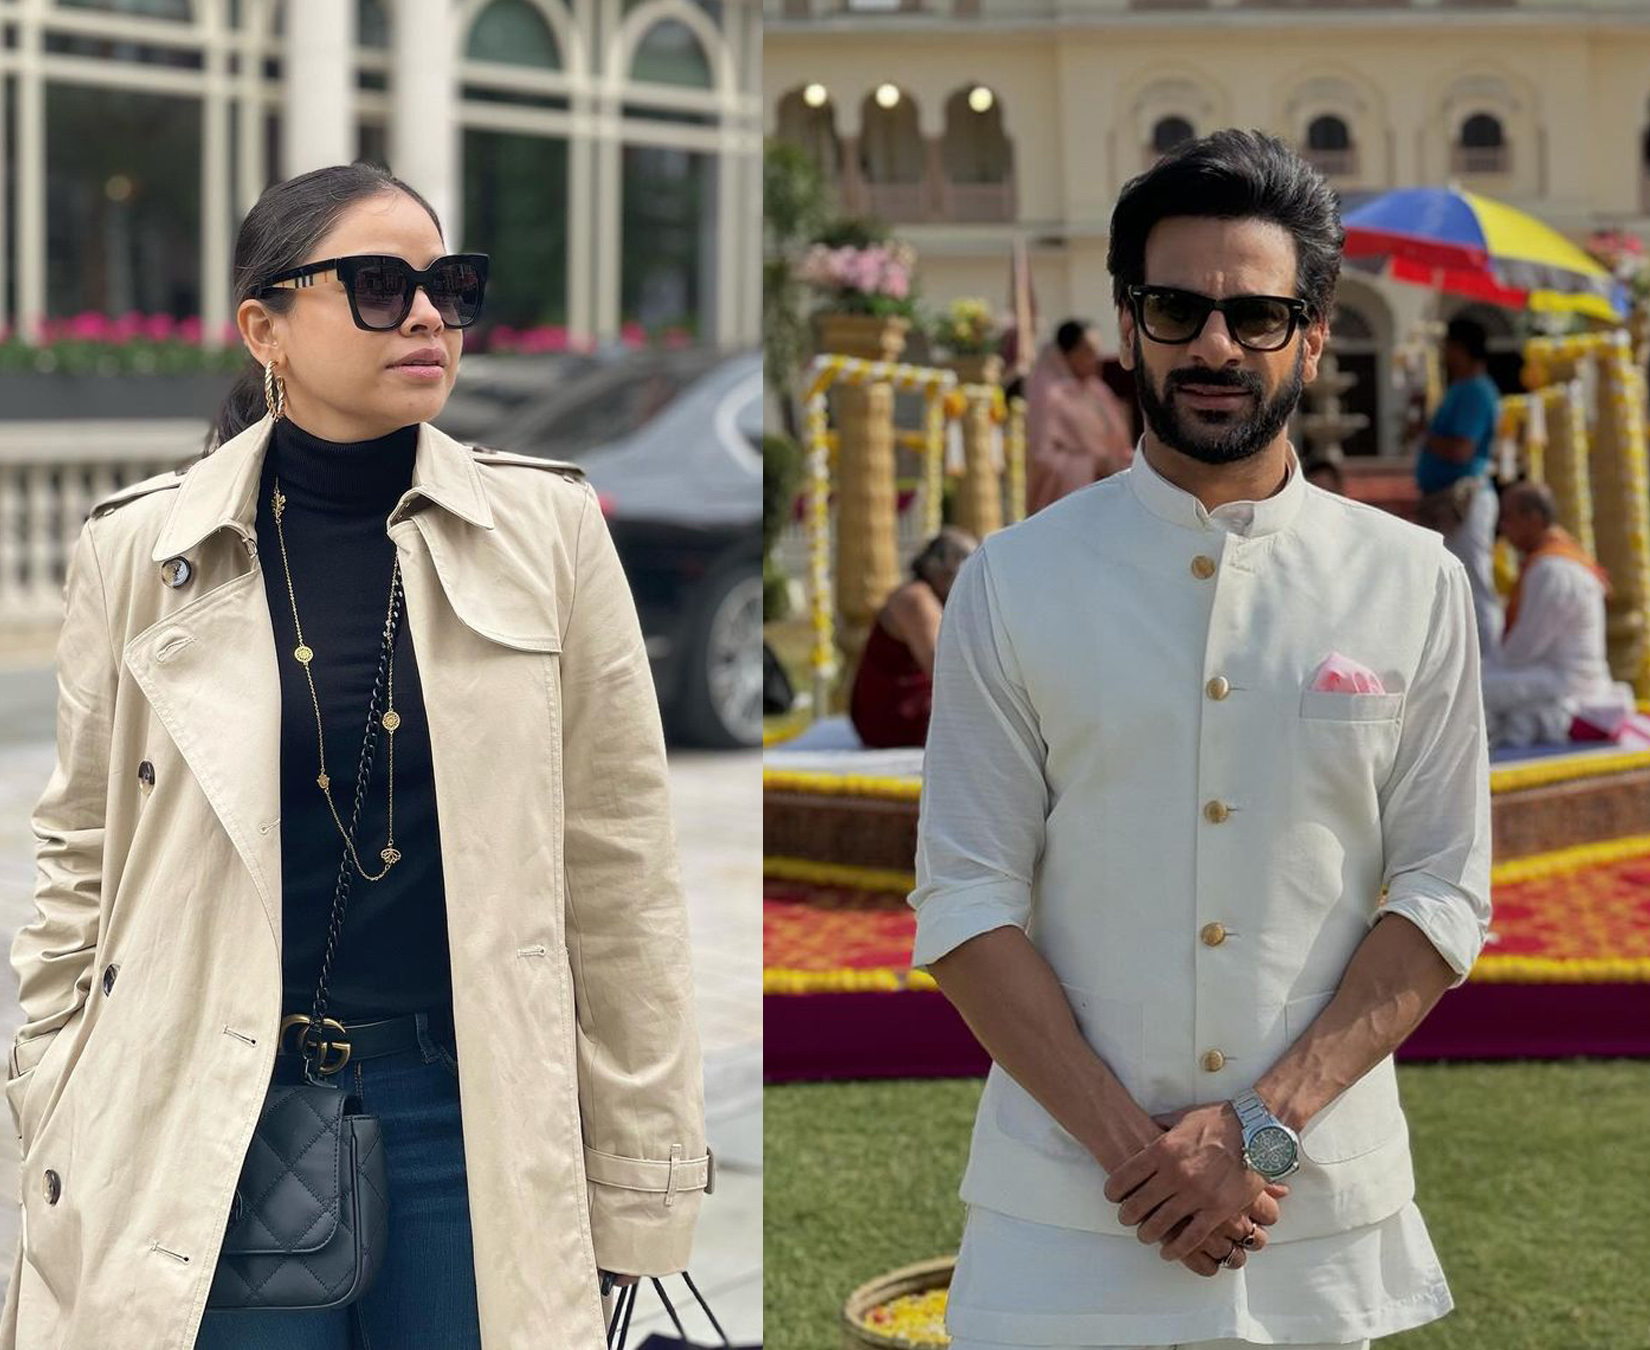 Television Fame Sumona Chakravarti And Karan Veer Mehra Share Heart-Warming Moments In Romania. Their Friendship Sparks Nostalgia For Their Recent Clicks. Check Out It! 